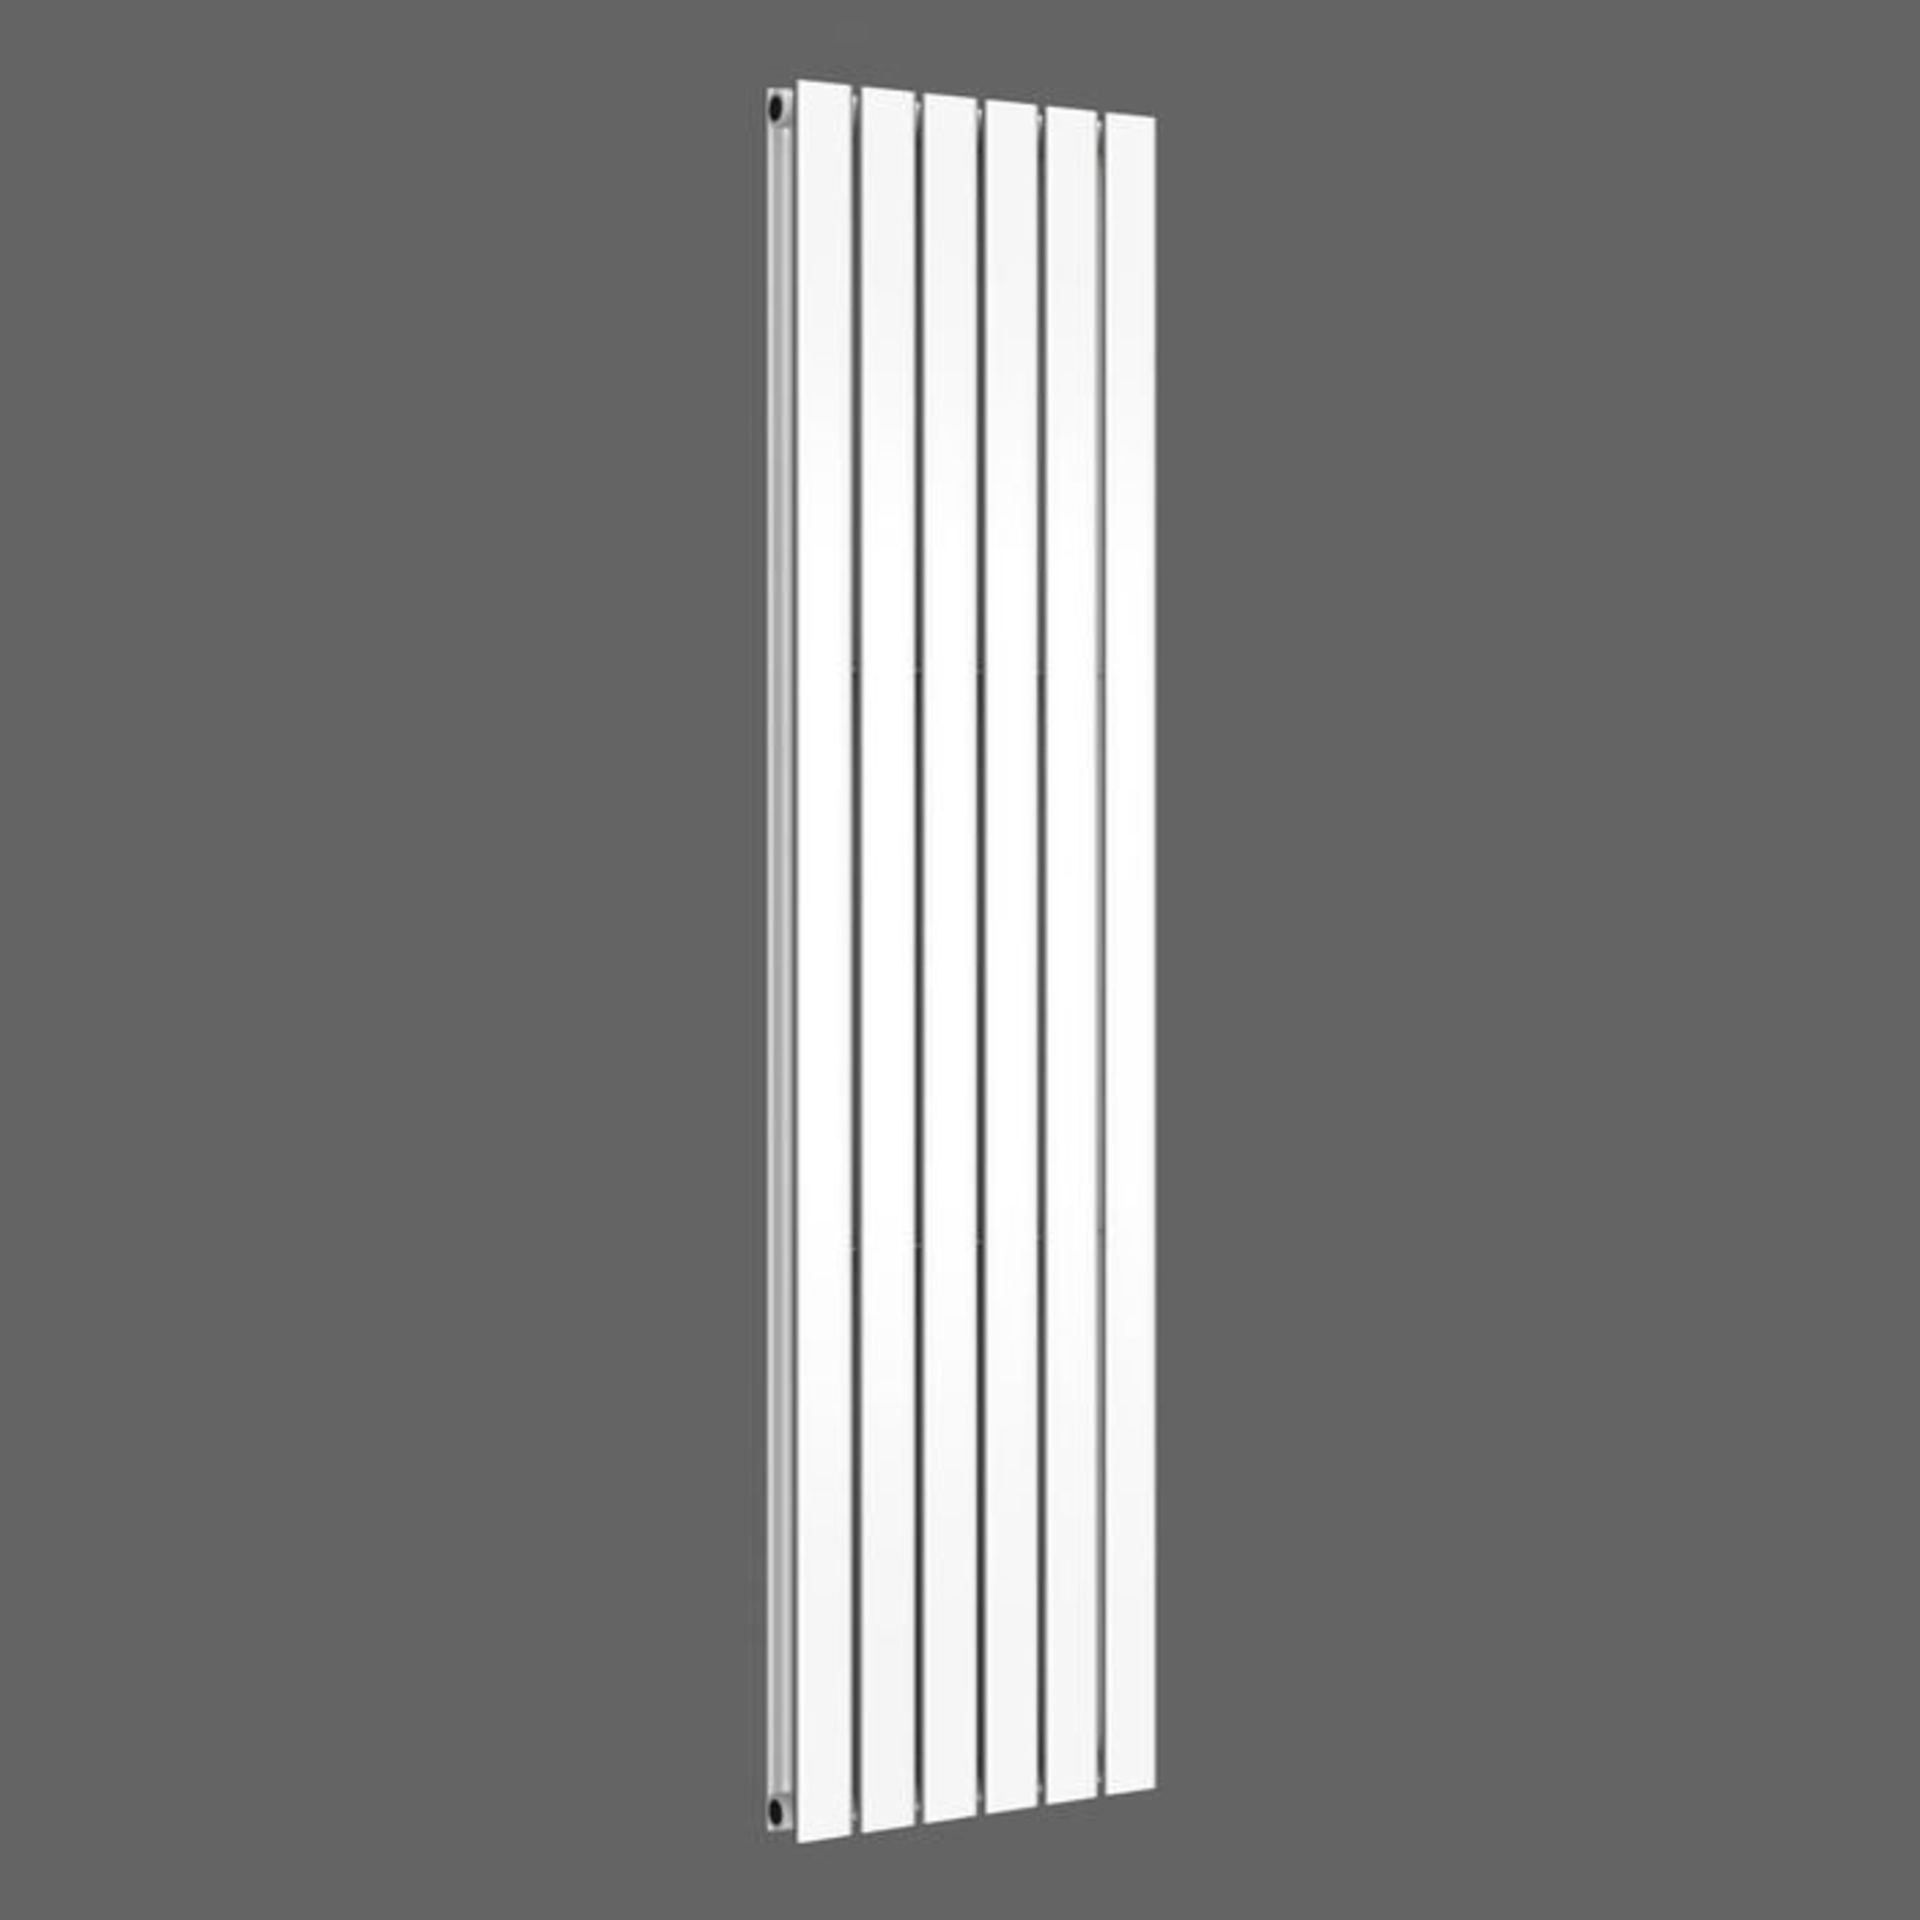 (Y1) 1800x452mm Gloss White Double Flat Panel Vertical Radiator. Safety tested at 10 bar pressure. - Image 2 of 2